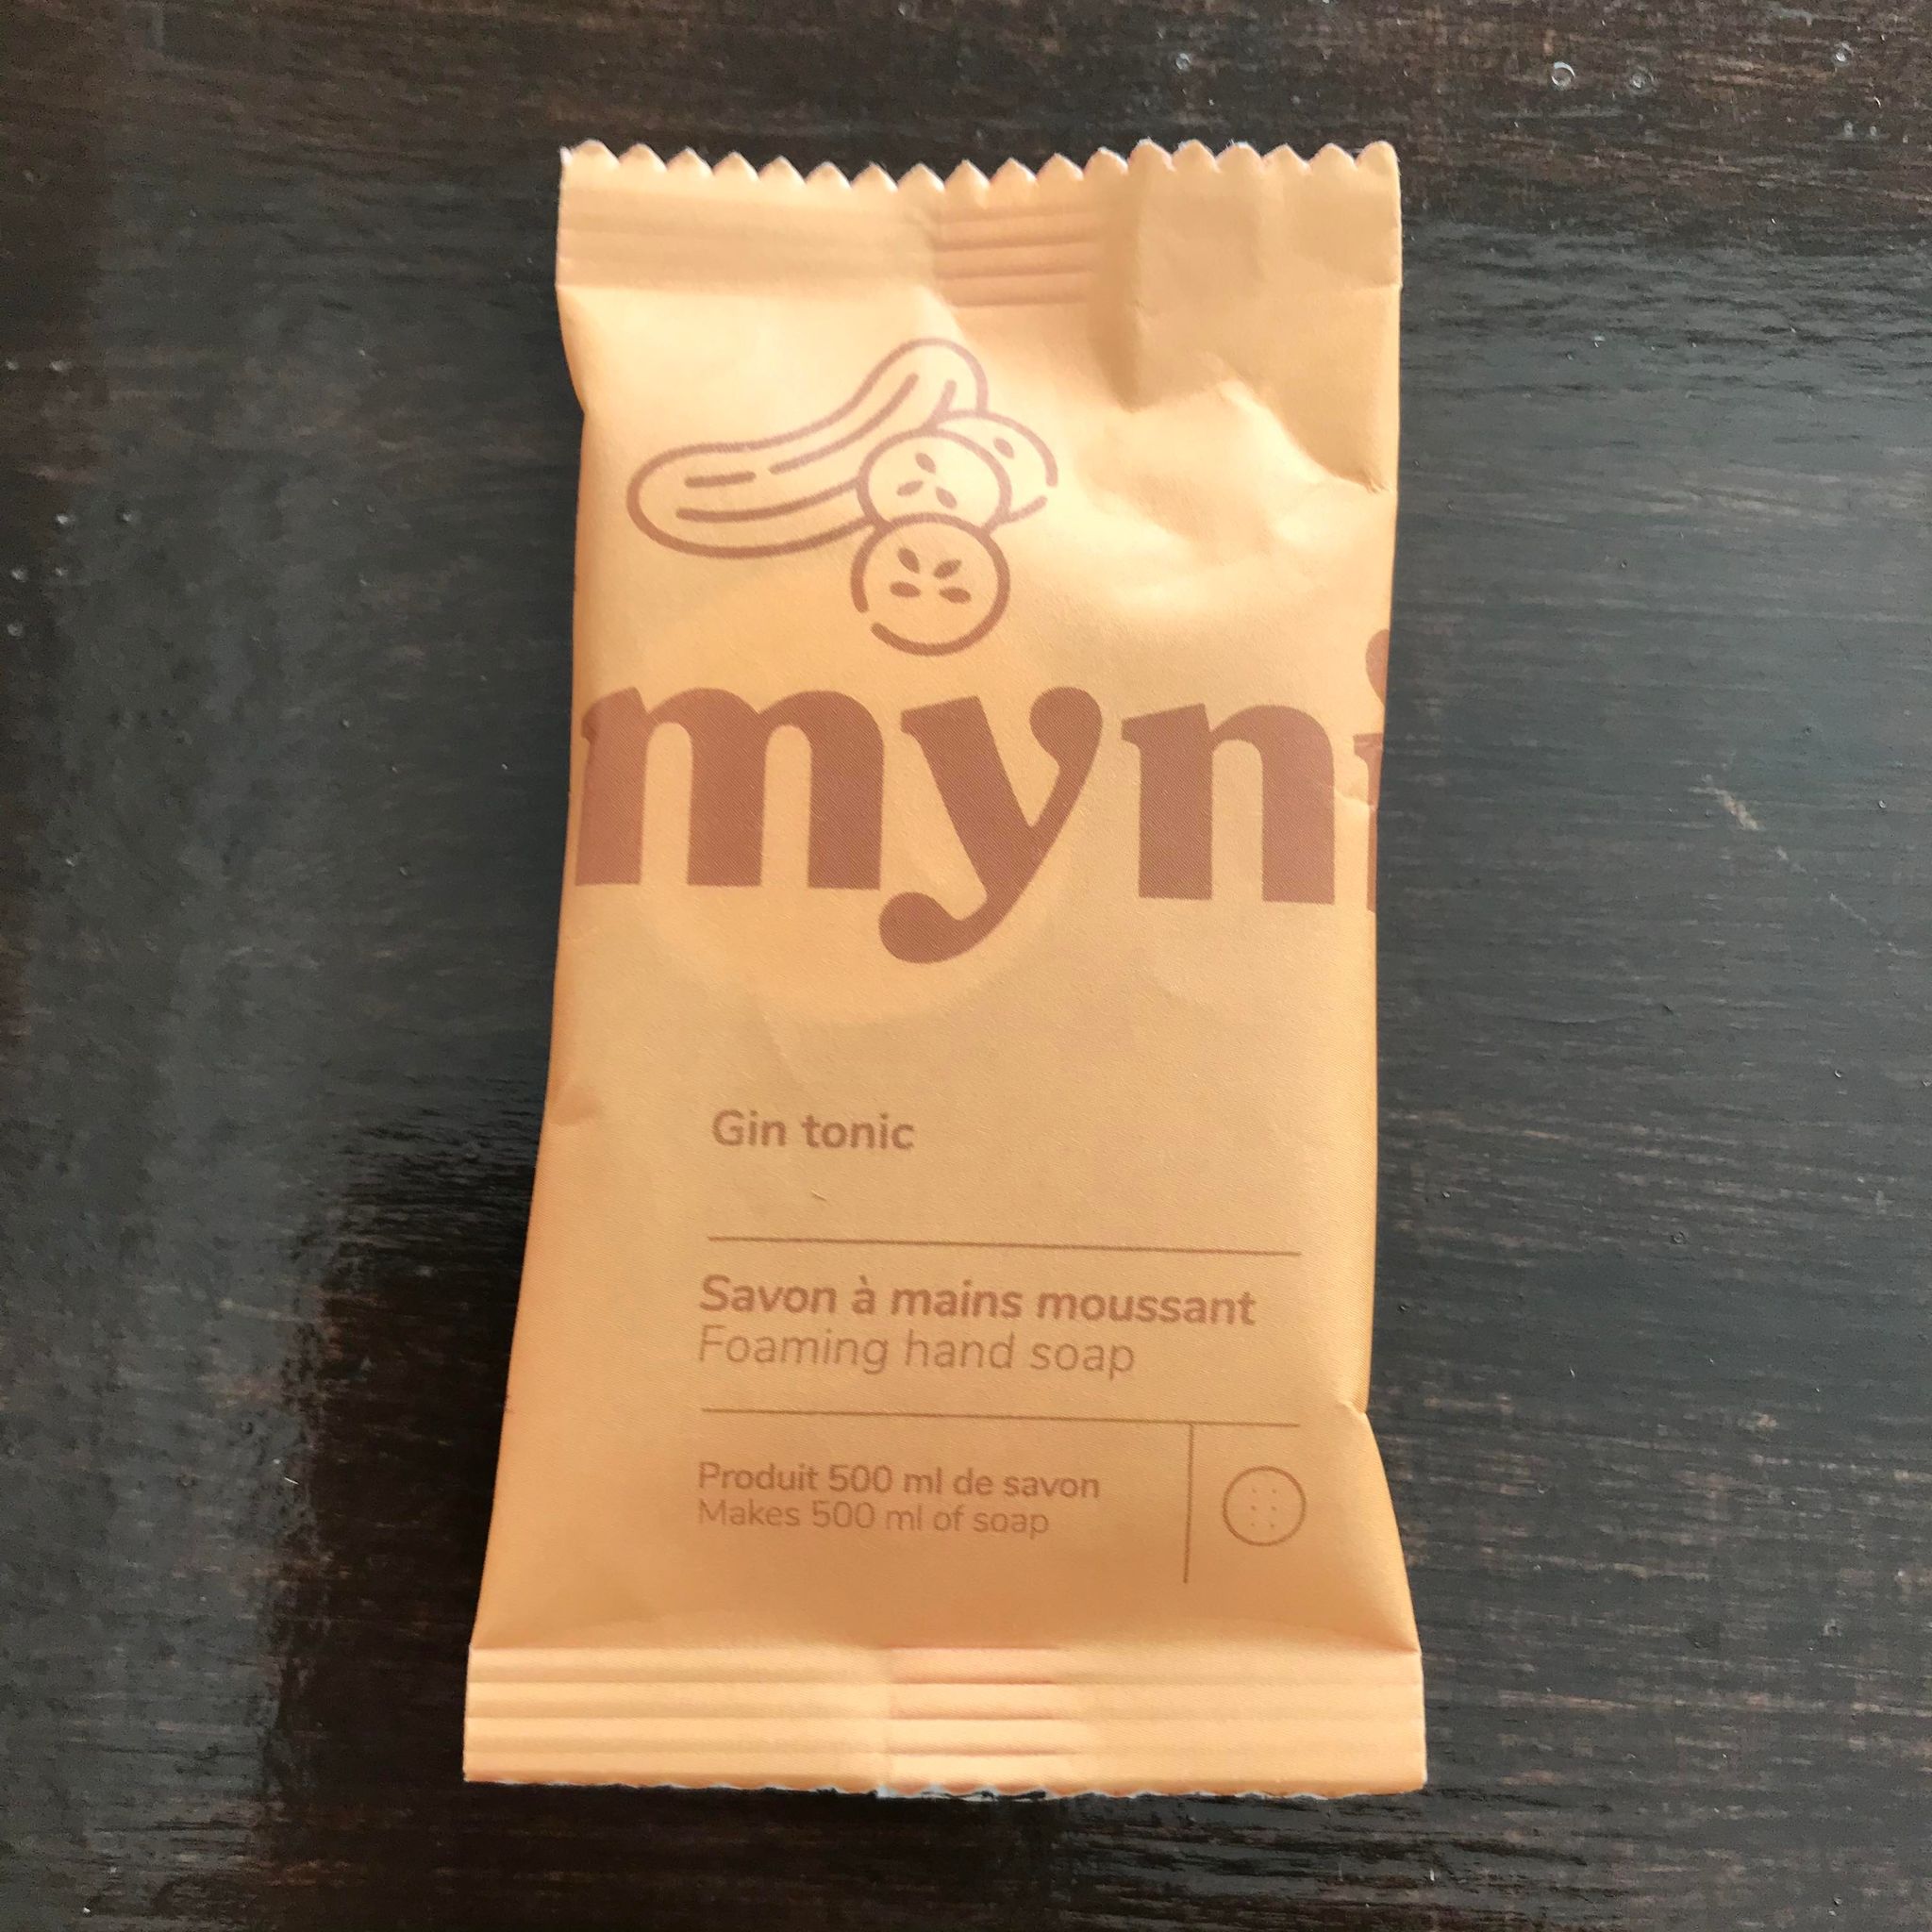 'Gin tonic' green and cucumber scented foaming hand soap concentrate in compostable pouch made in canada by myni